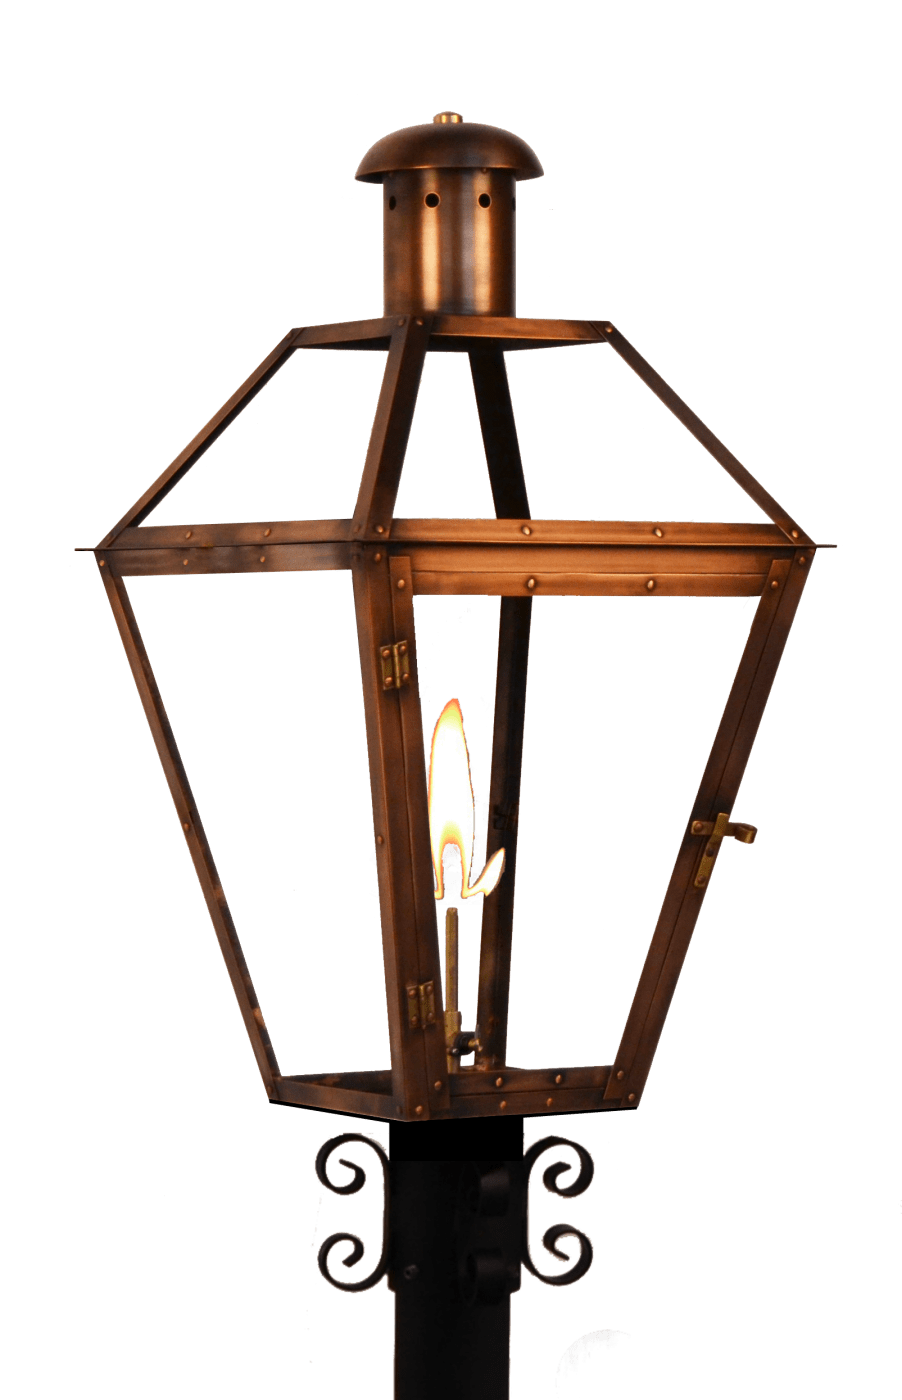 Georgetown Weiyan LED Rechargeable Portable Lantern by The CopperSmith